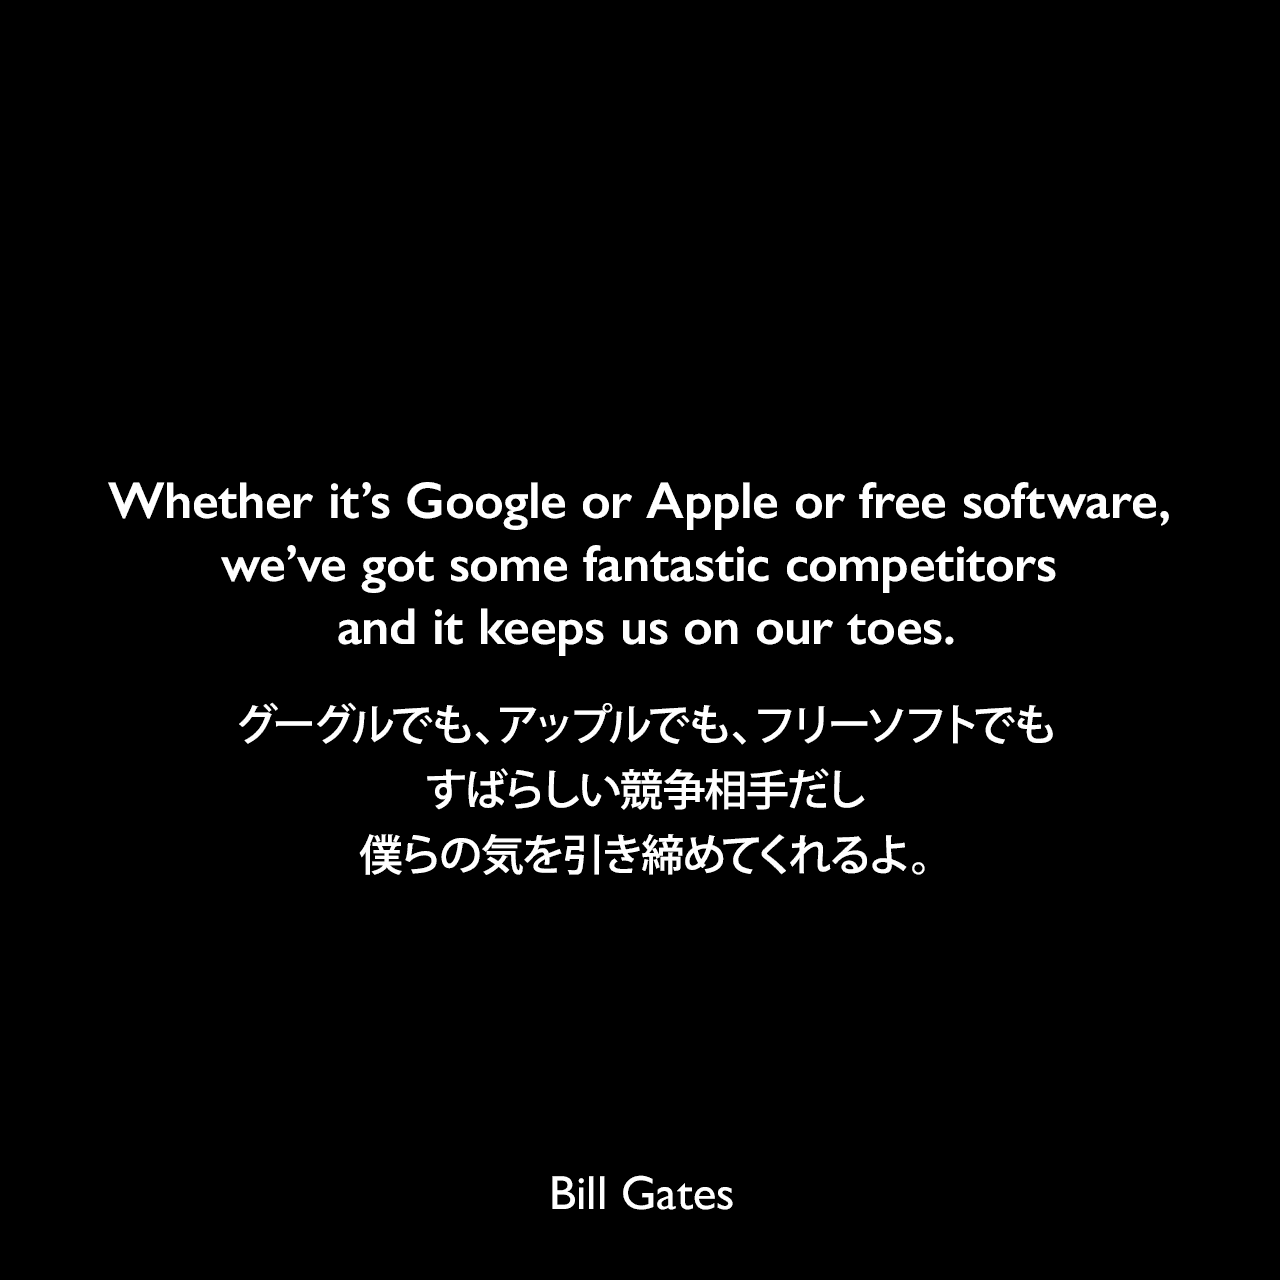 Whether it’s Google or Apple or free software, we’ve got some fantastic competitors and it keeps us on our toes.グーグルでも、アップルでも、フリーソフトでも、すばらしい競争相手だし、僕らの気を引き締めてくれるよ。Bill Gates